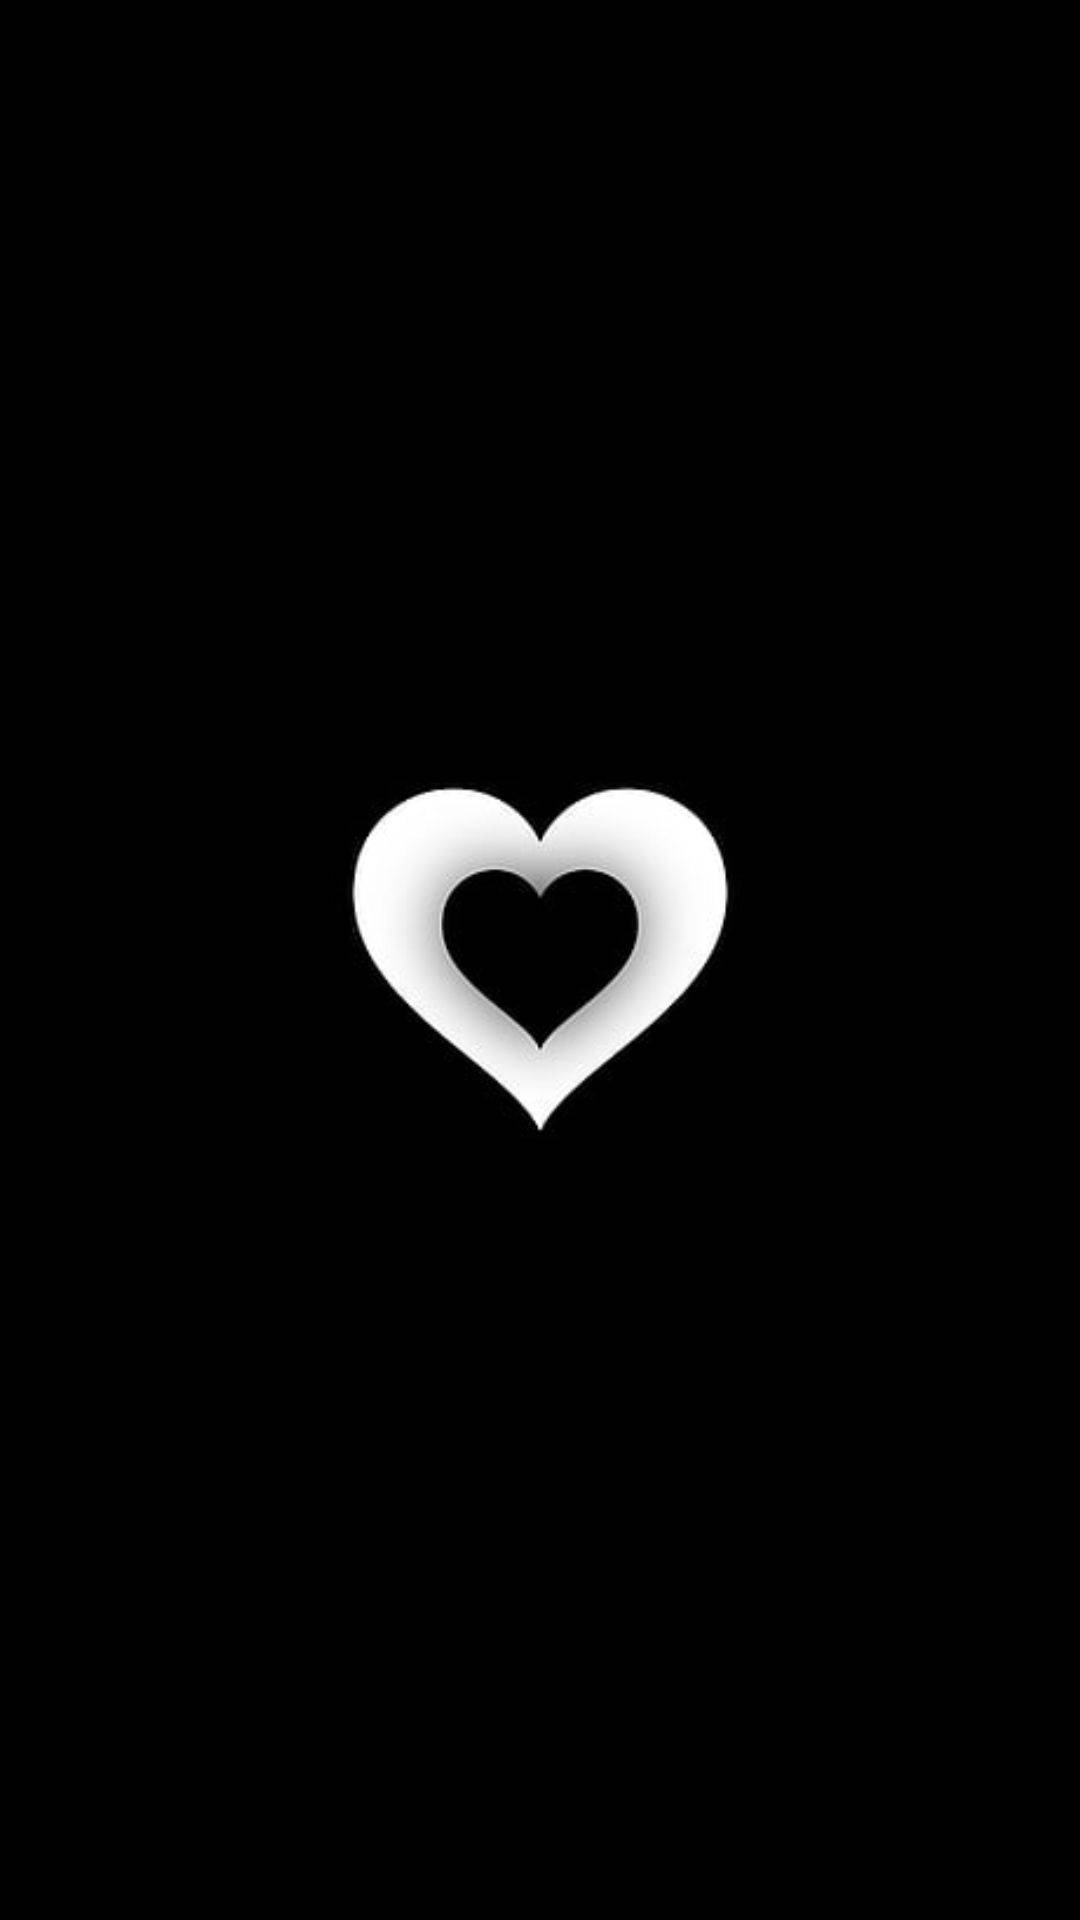 Black Heart On A White Heart Background